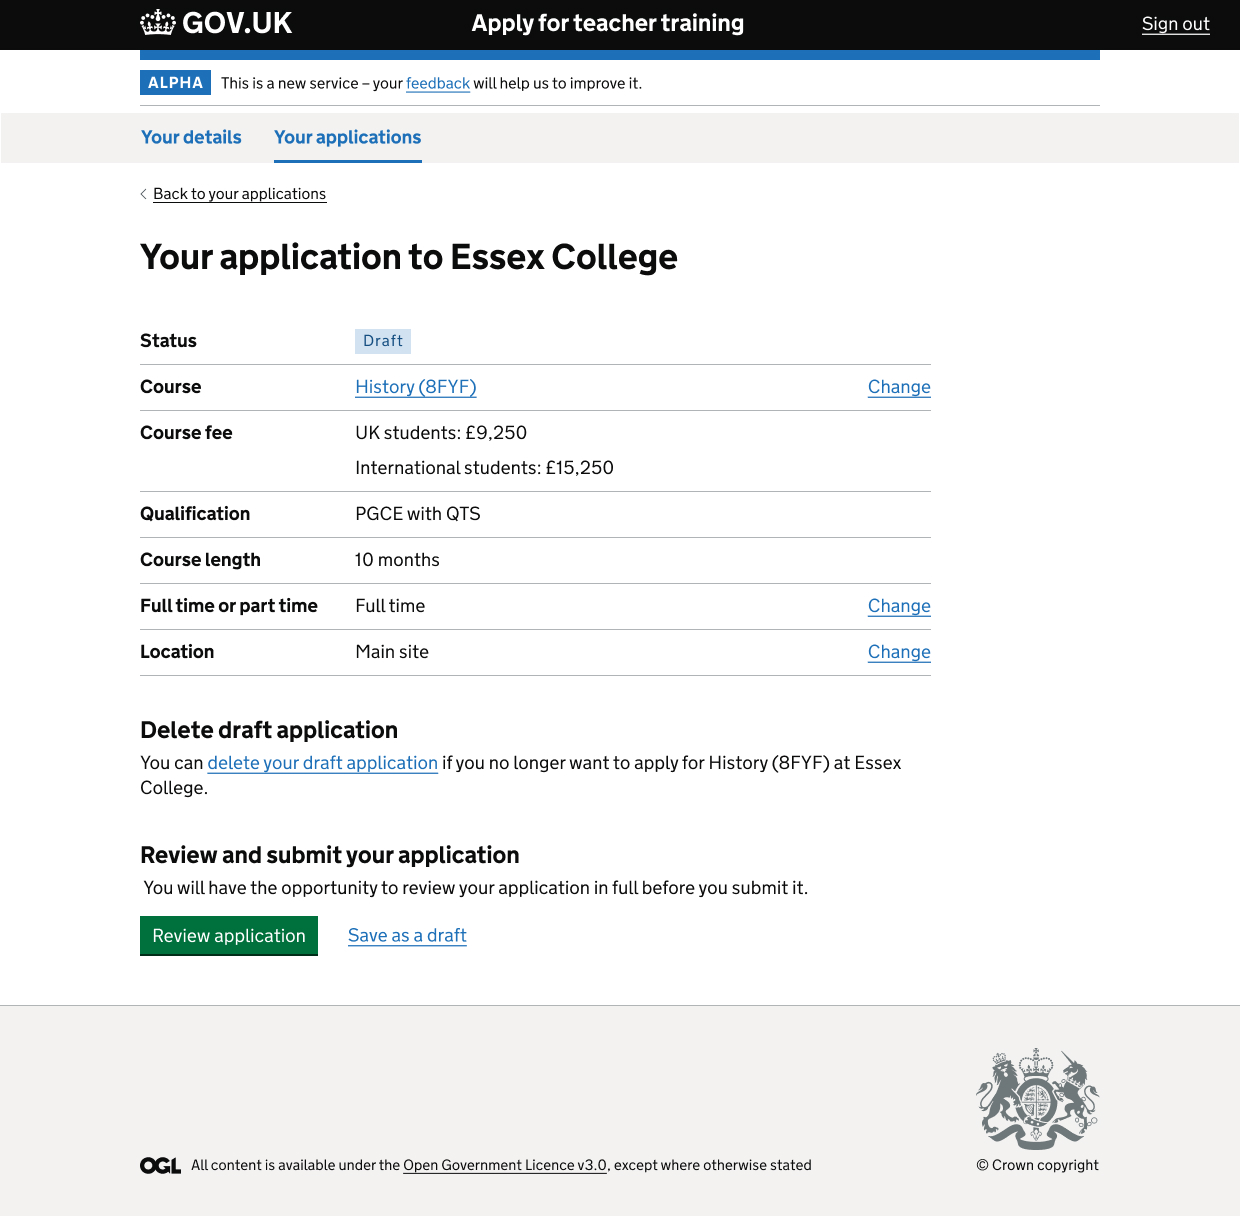 Screenshot of draft application page before a candidate reviews and submits their application, showing all course information including UK and International course fees